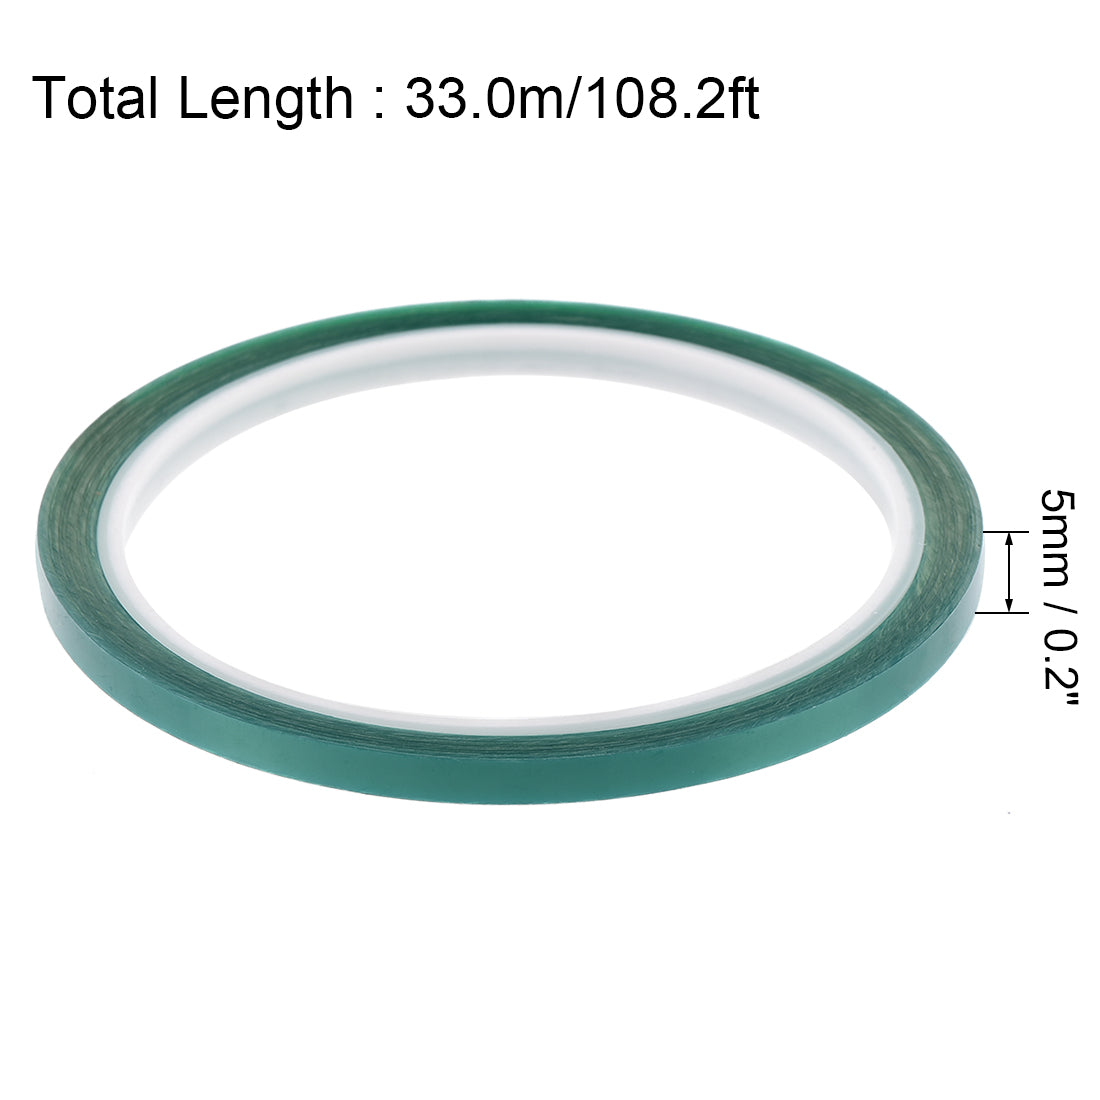 uxcell Uxcell 5mm PET Tape Green High Temperature Tape 33.0m/108.2ft 2 Roll